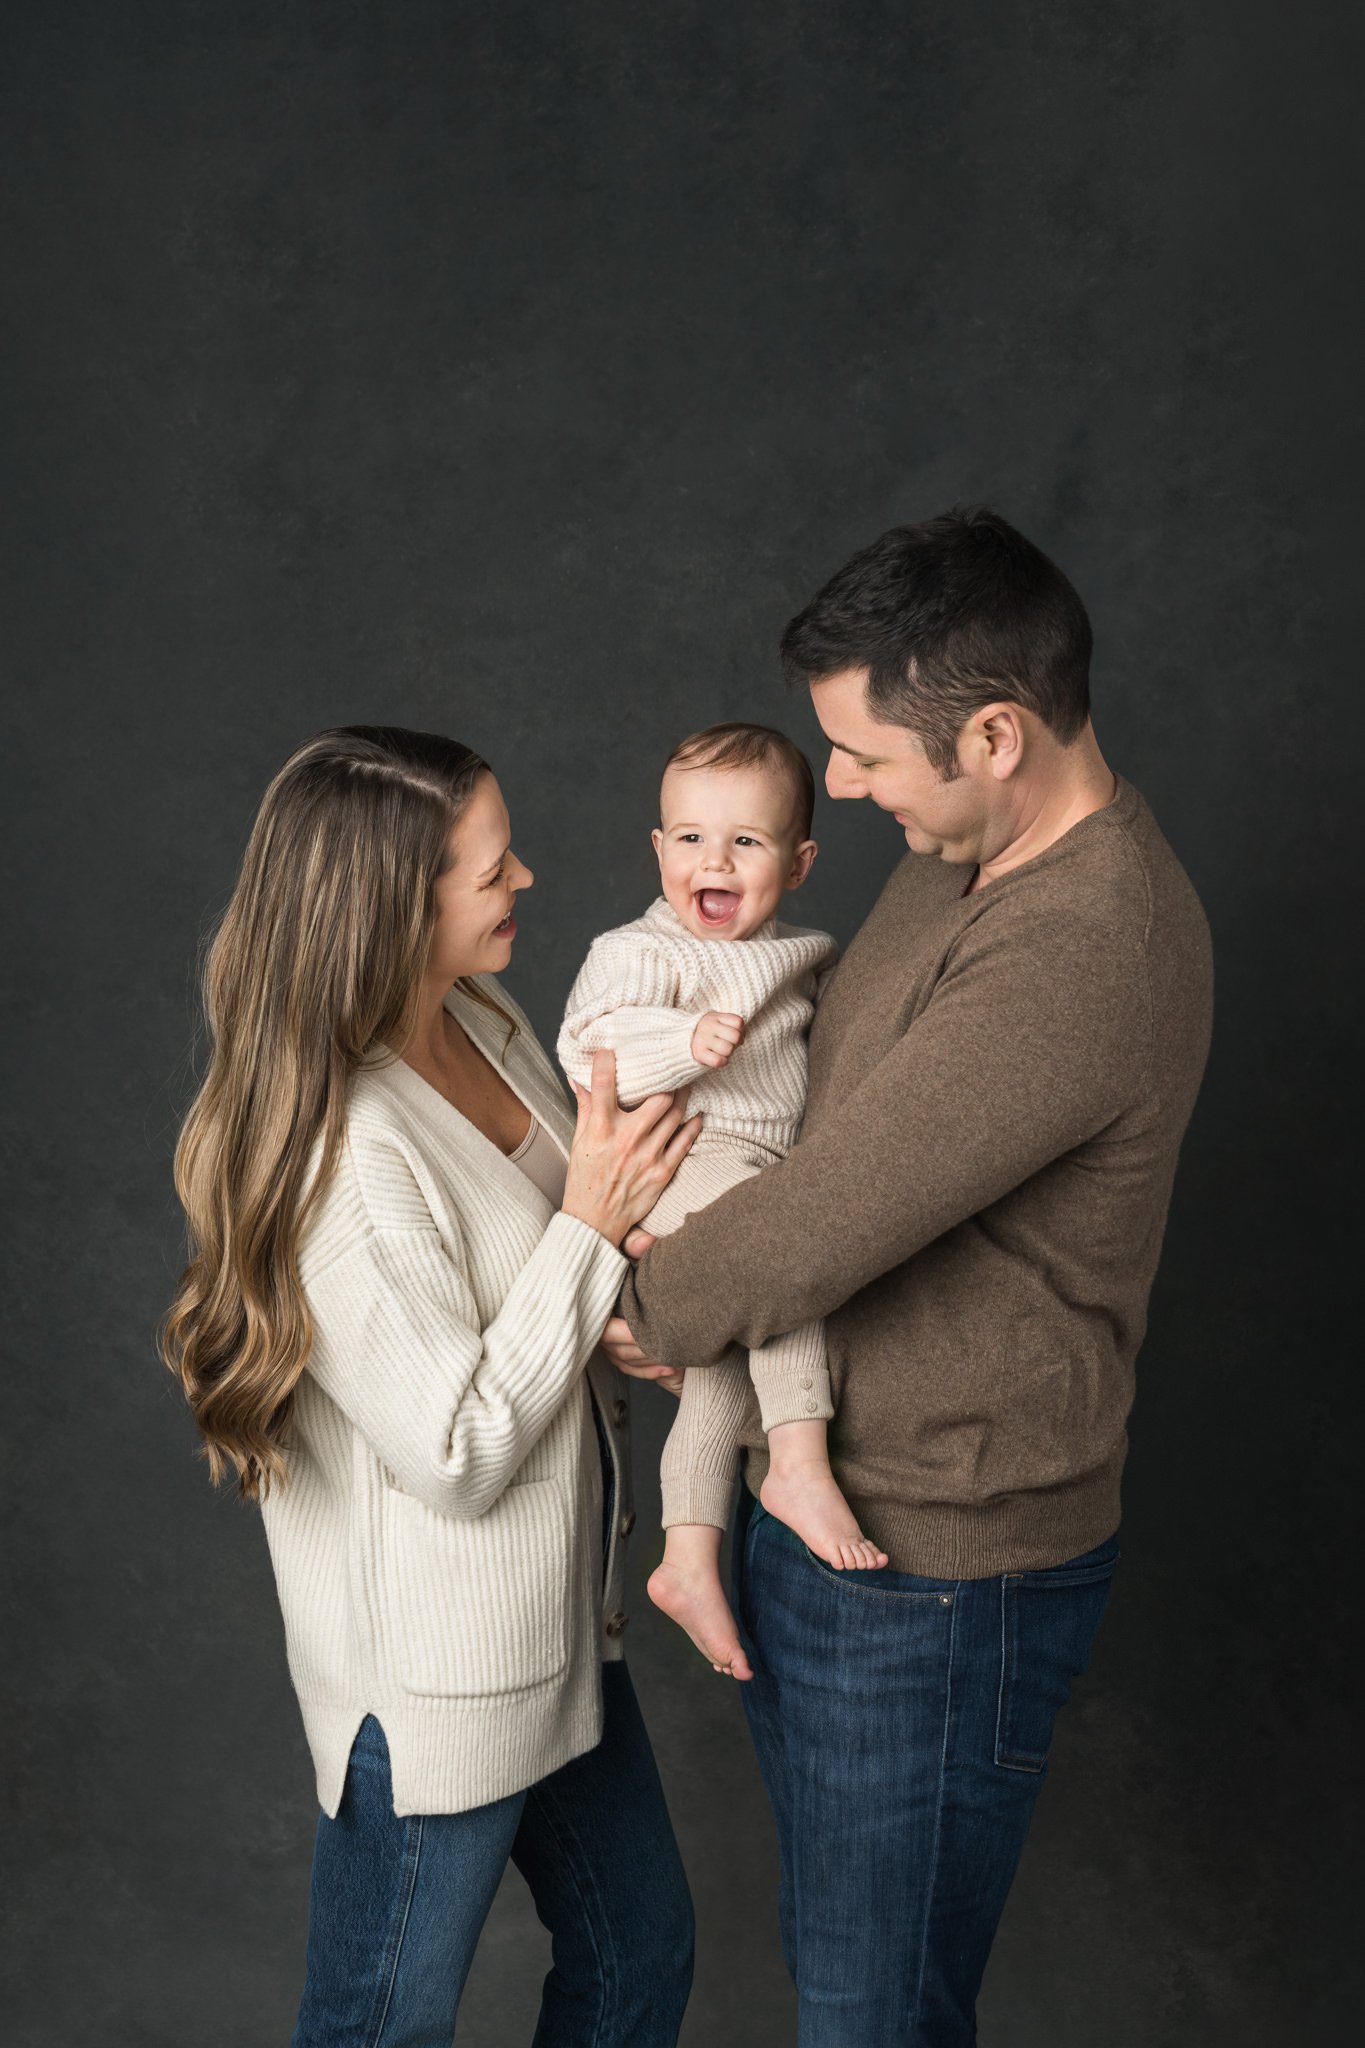  Nicole Hawkins Photography captures a candid portrait of a family during a first birthday portrait session. candid family portraits studio family pictures #NicoleHawkinsPhotography #NicoleHawkinsBabies #FirstBirthdayPhotography #StudioFamilyPortrait